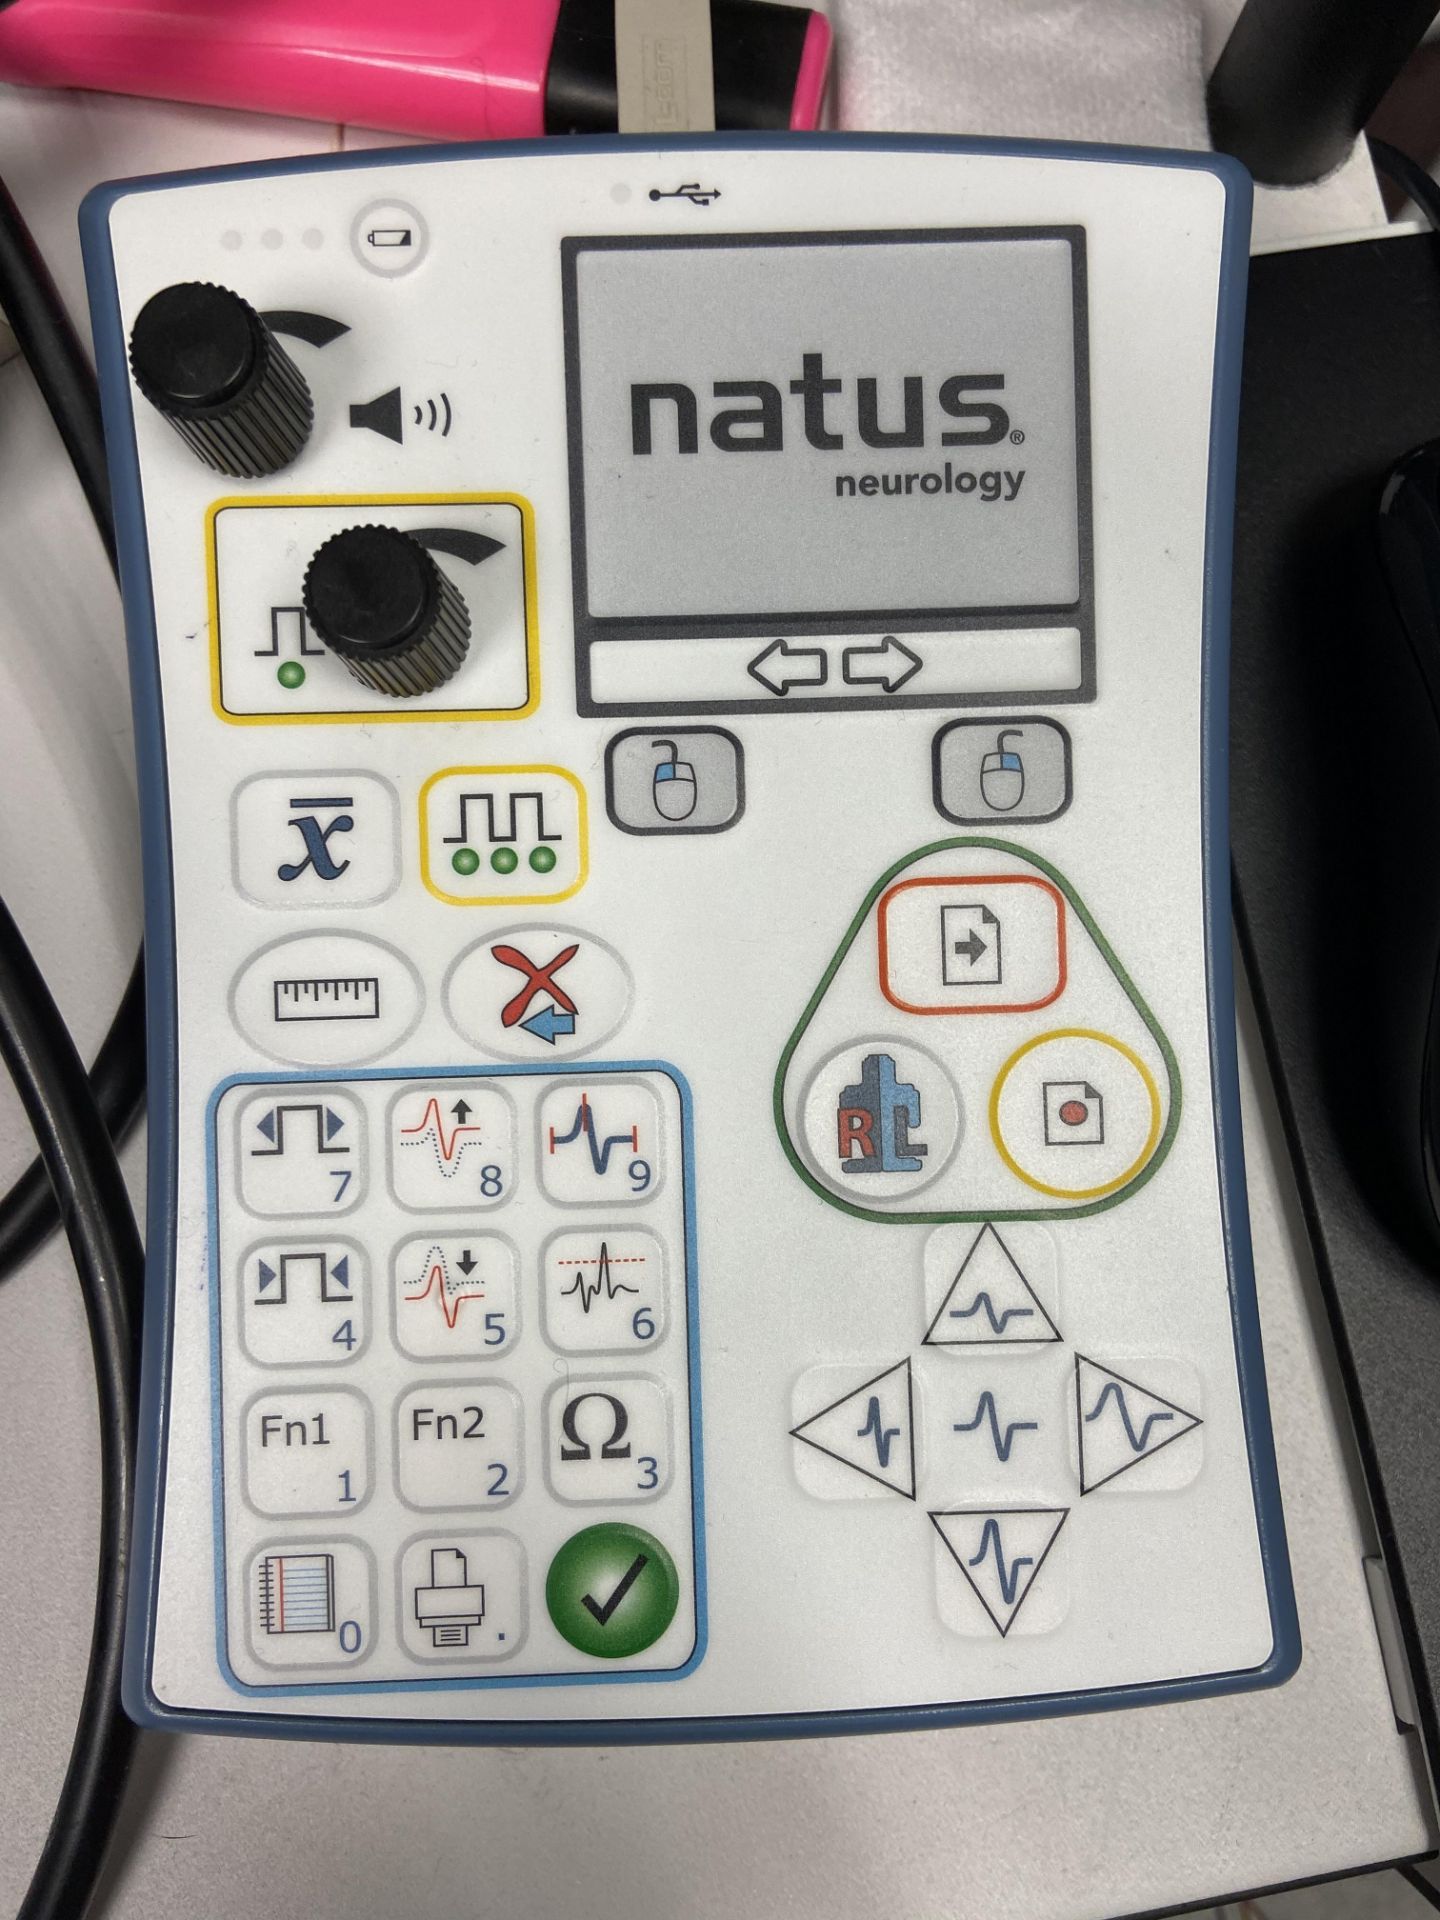 Natus neurology trolley mounted hearing test system with Nicolet AT2 amplifier and Telephonics TDH- - Image 2 of 4